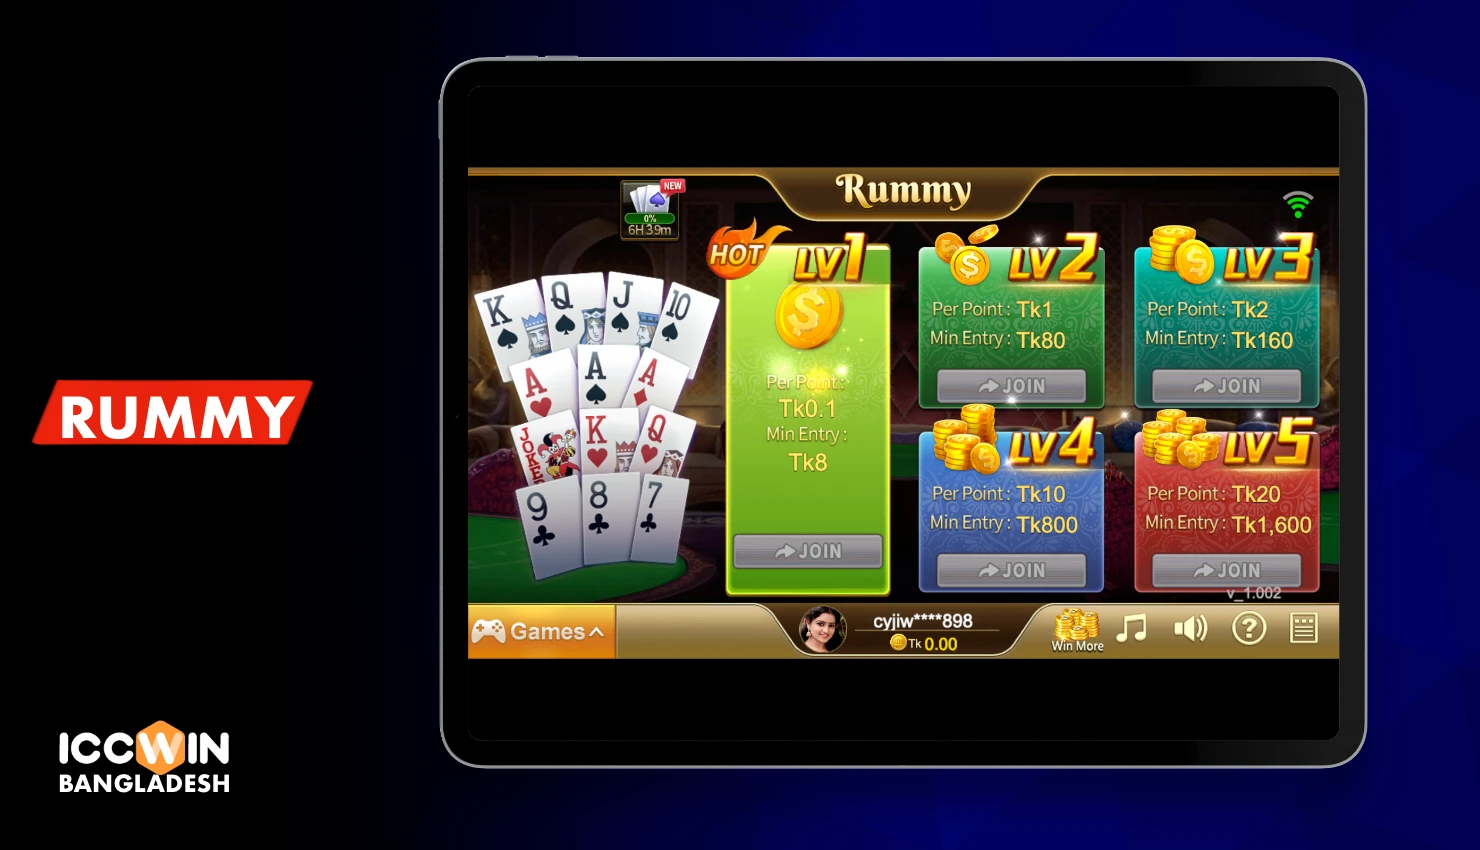 Play Rummy online at Iccwin with your friends and win real money